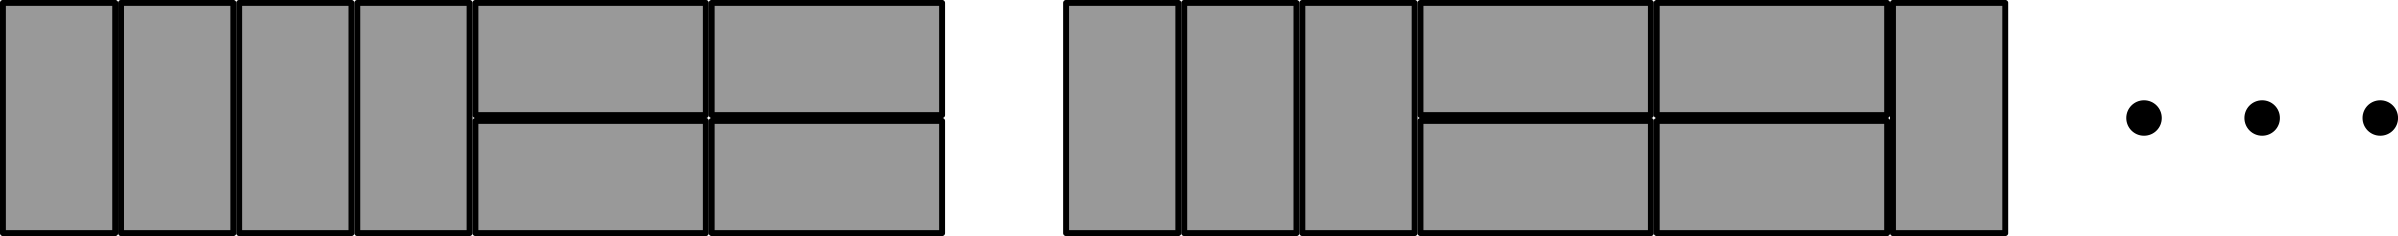 The first arrangement has five vertical rectangles followed by two pairs of horizontal rectangles. The second has three vertical rectangles followed by two pairs of horizontal rectangles and then one vertical rectangle.